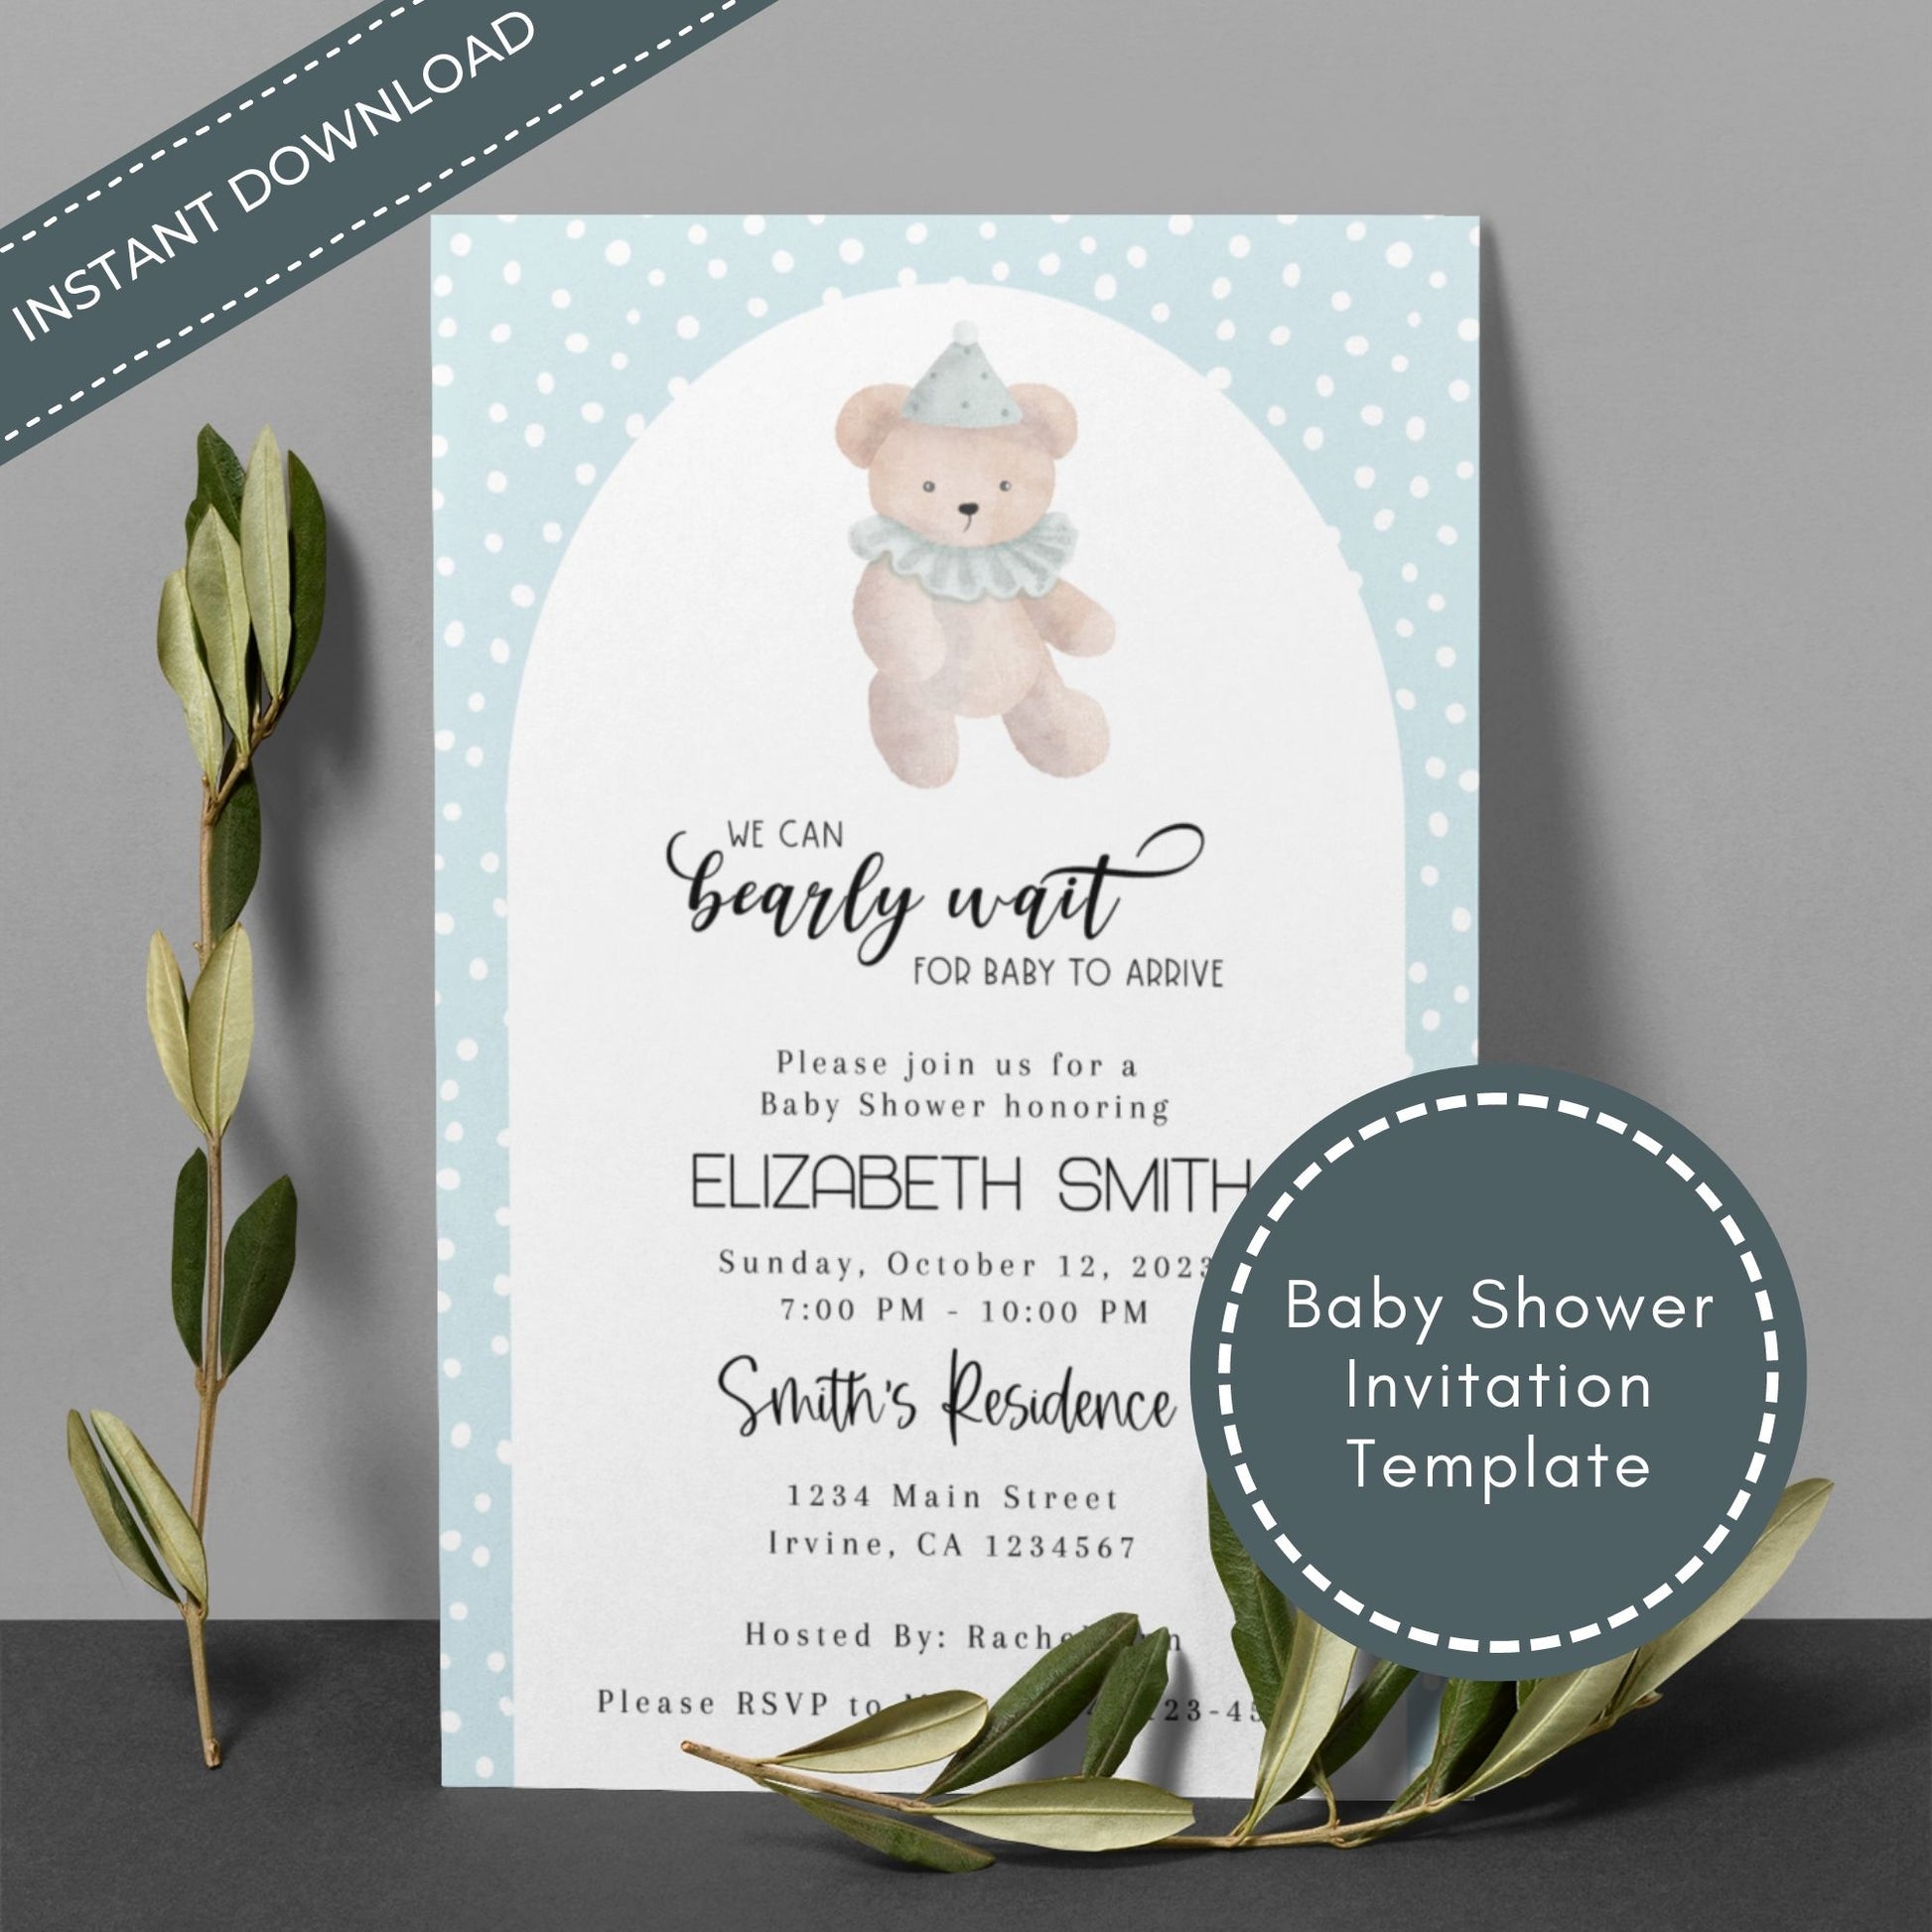 We Can Bearly Wait Baby Shower Invitation Template